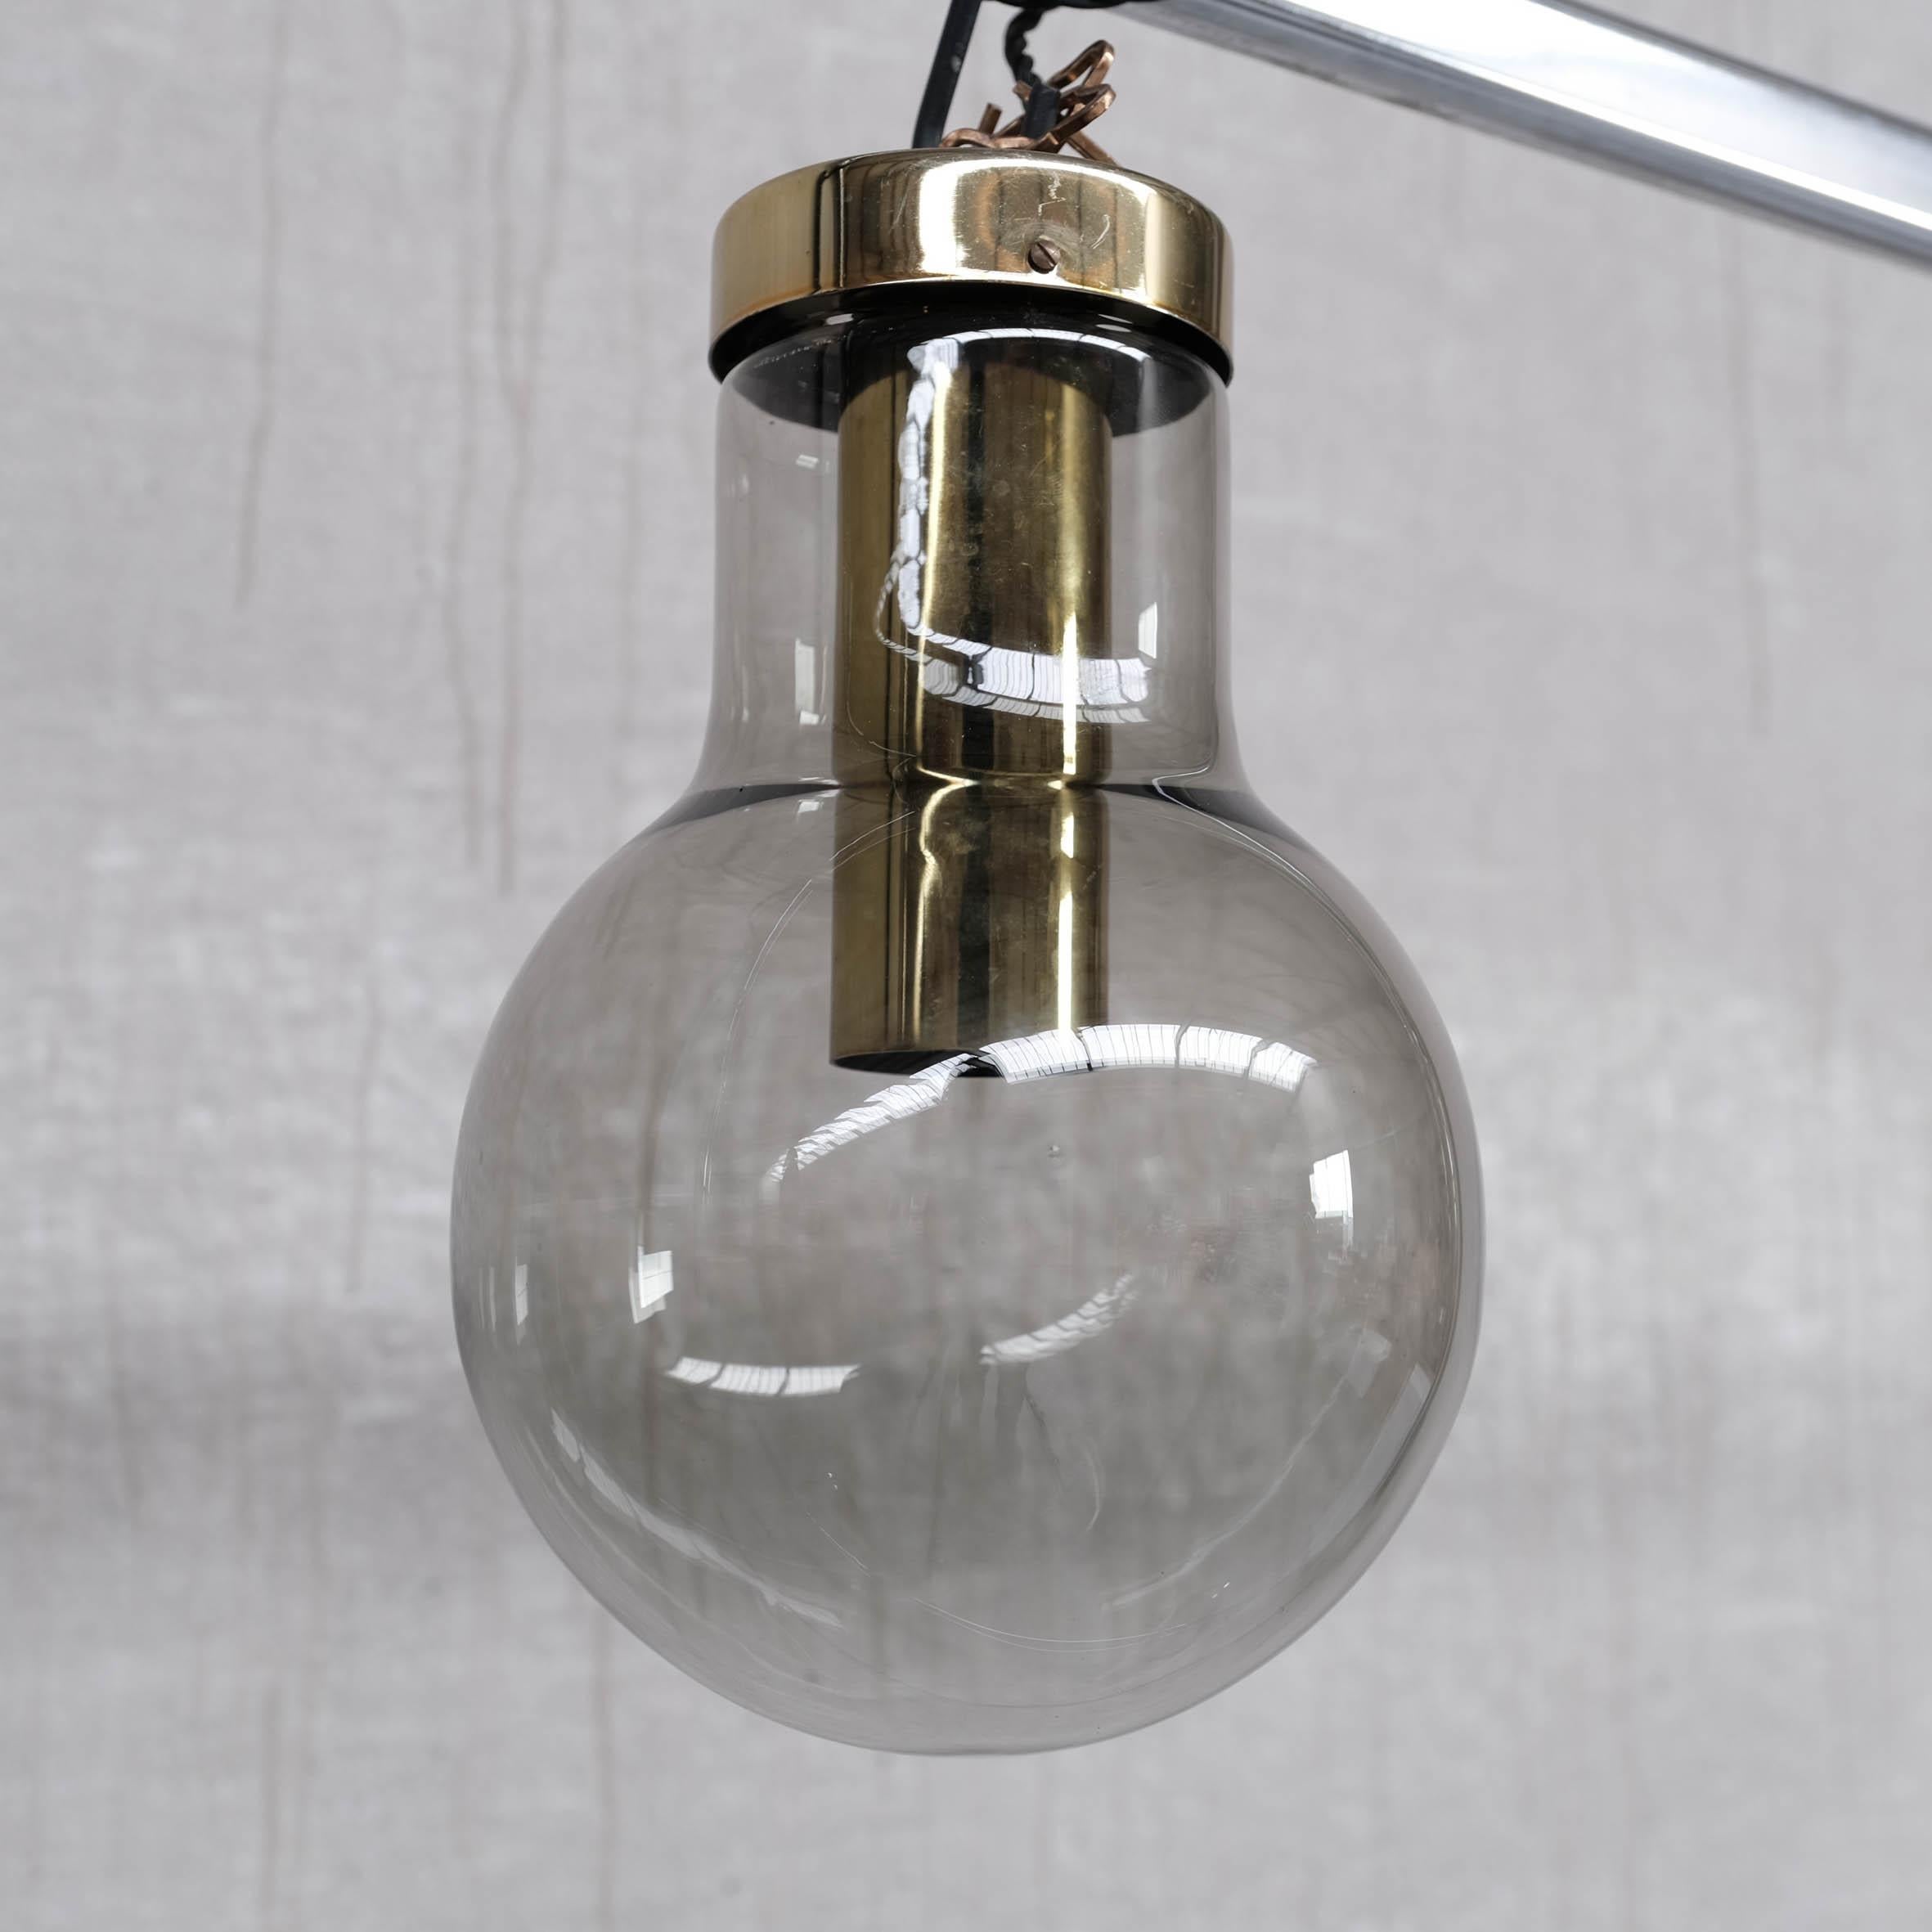 Smoked Midcentury Glass and Brass Pendant Lights by RAAK, '6 Available' For Sale 2